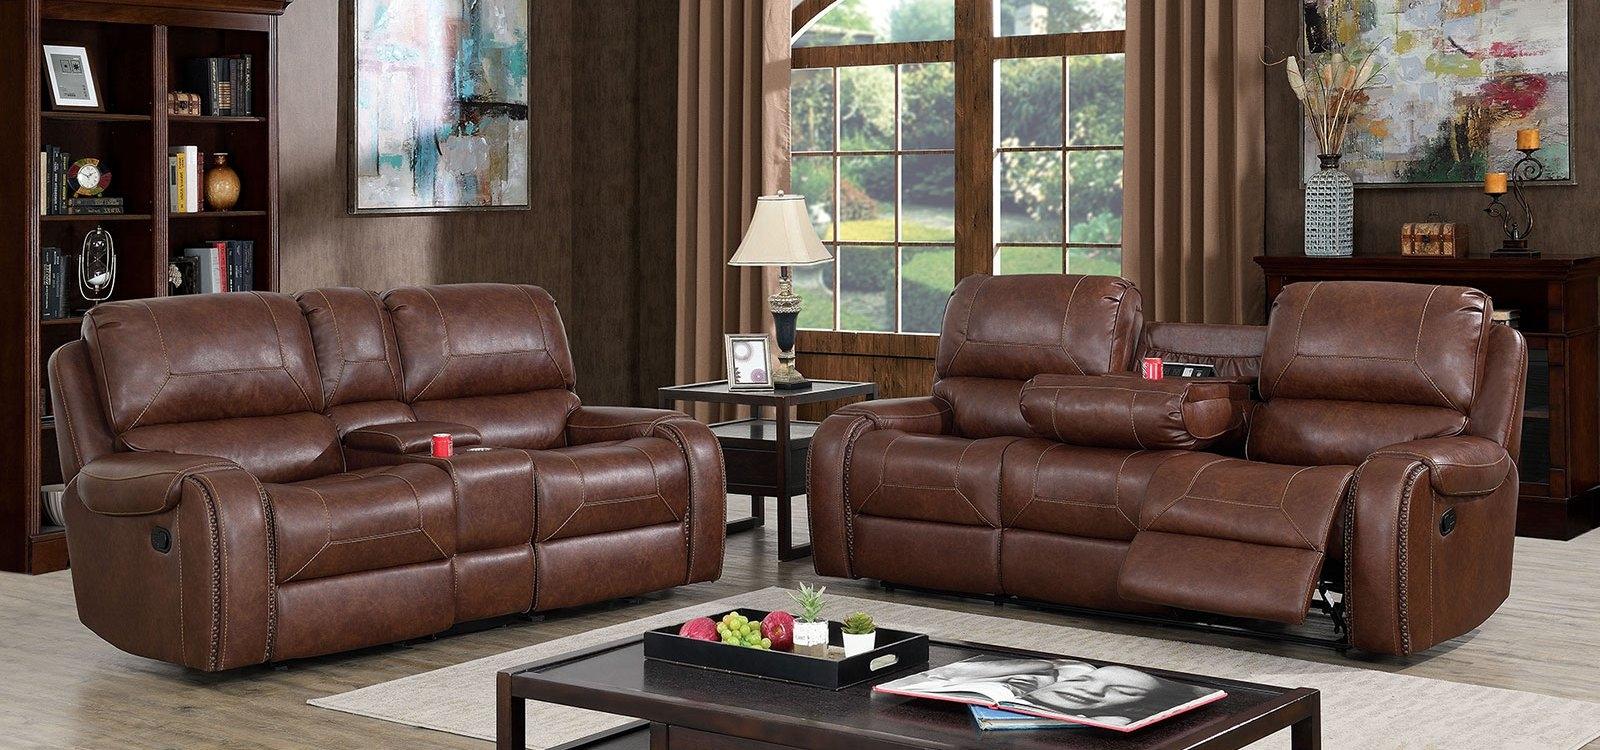 Transitional Power Sofa Loveseat and Recliner CM6950BR-3PC Walter CM6950BR-3PC in Brown Leatherette